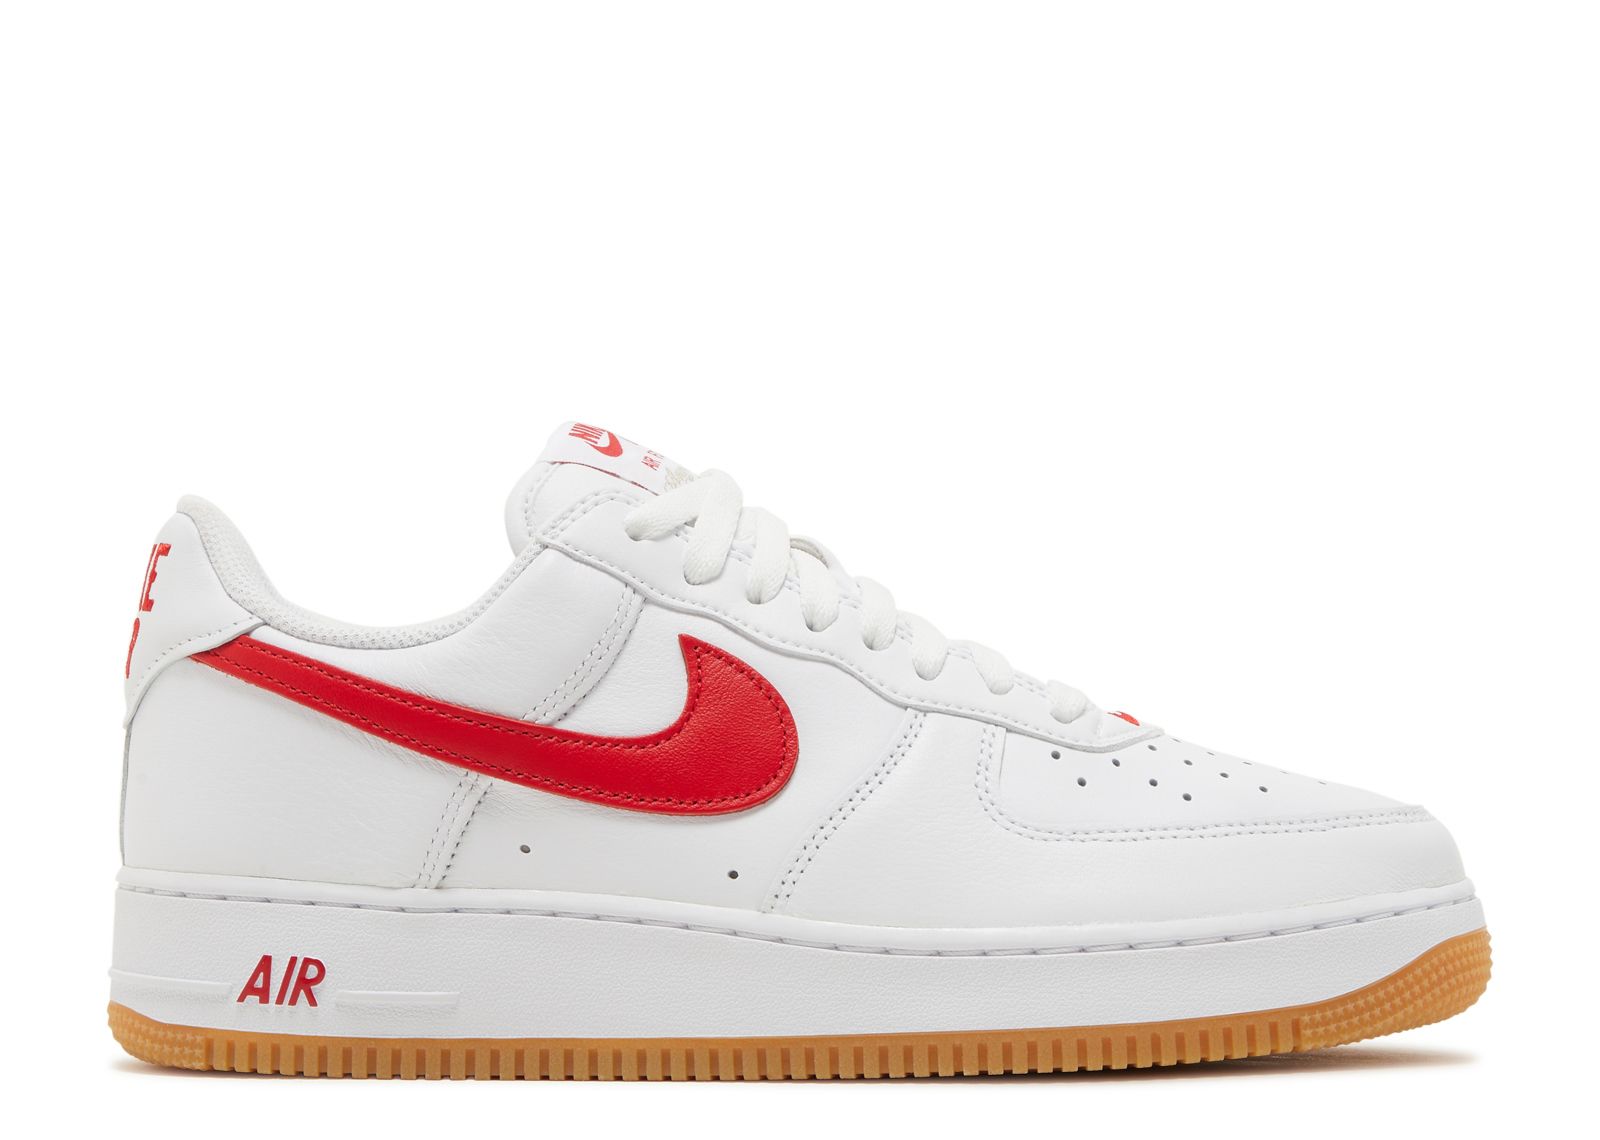 Кроссовки Nike Air Force 1 Low 'Color Of The Month - White University Red', белый original authentic nike air force 1 low mini swoosh men s skateboarding shoes sport outdoor sneakers 2018 new arrival 823511 603